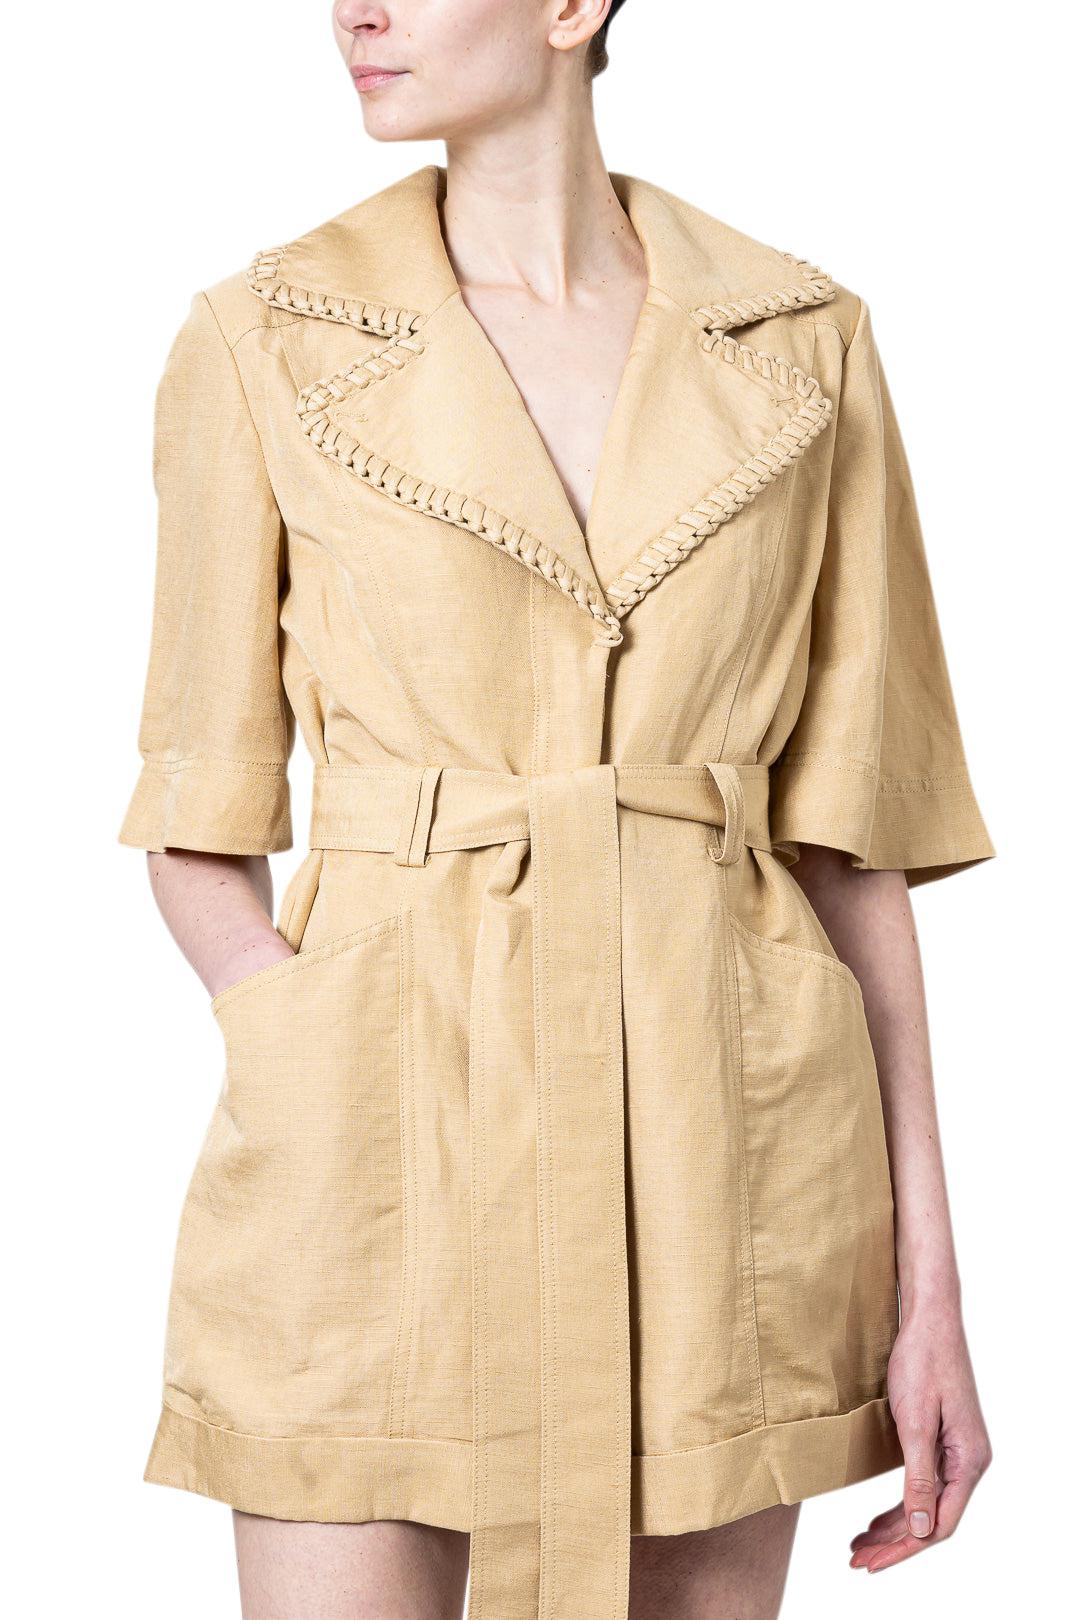 Aje-Tactil Whipstitch Playsuit-dgallerystore